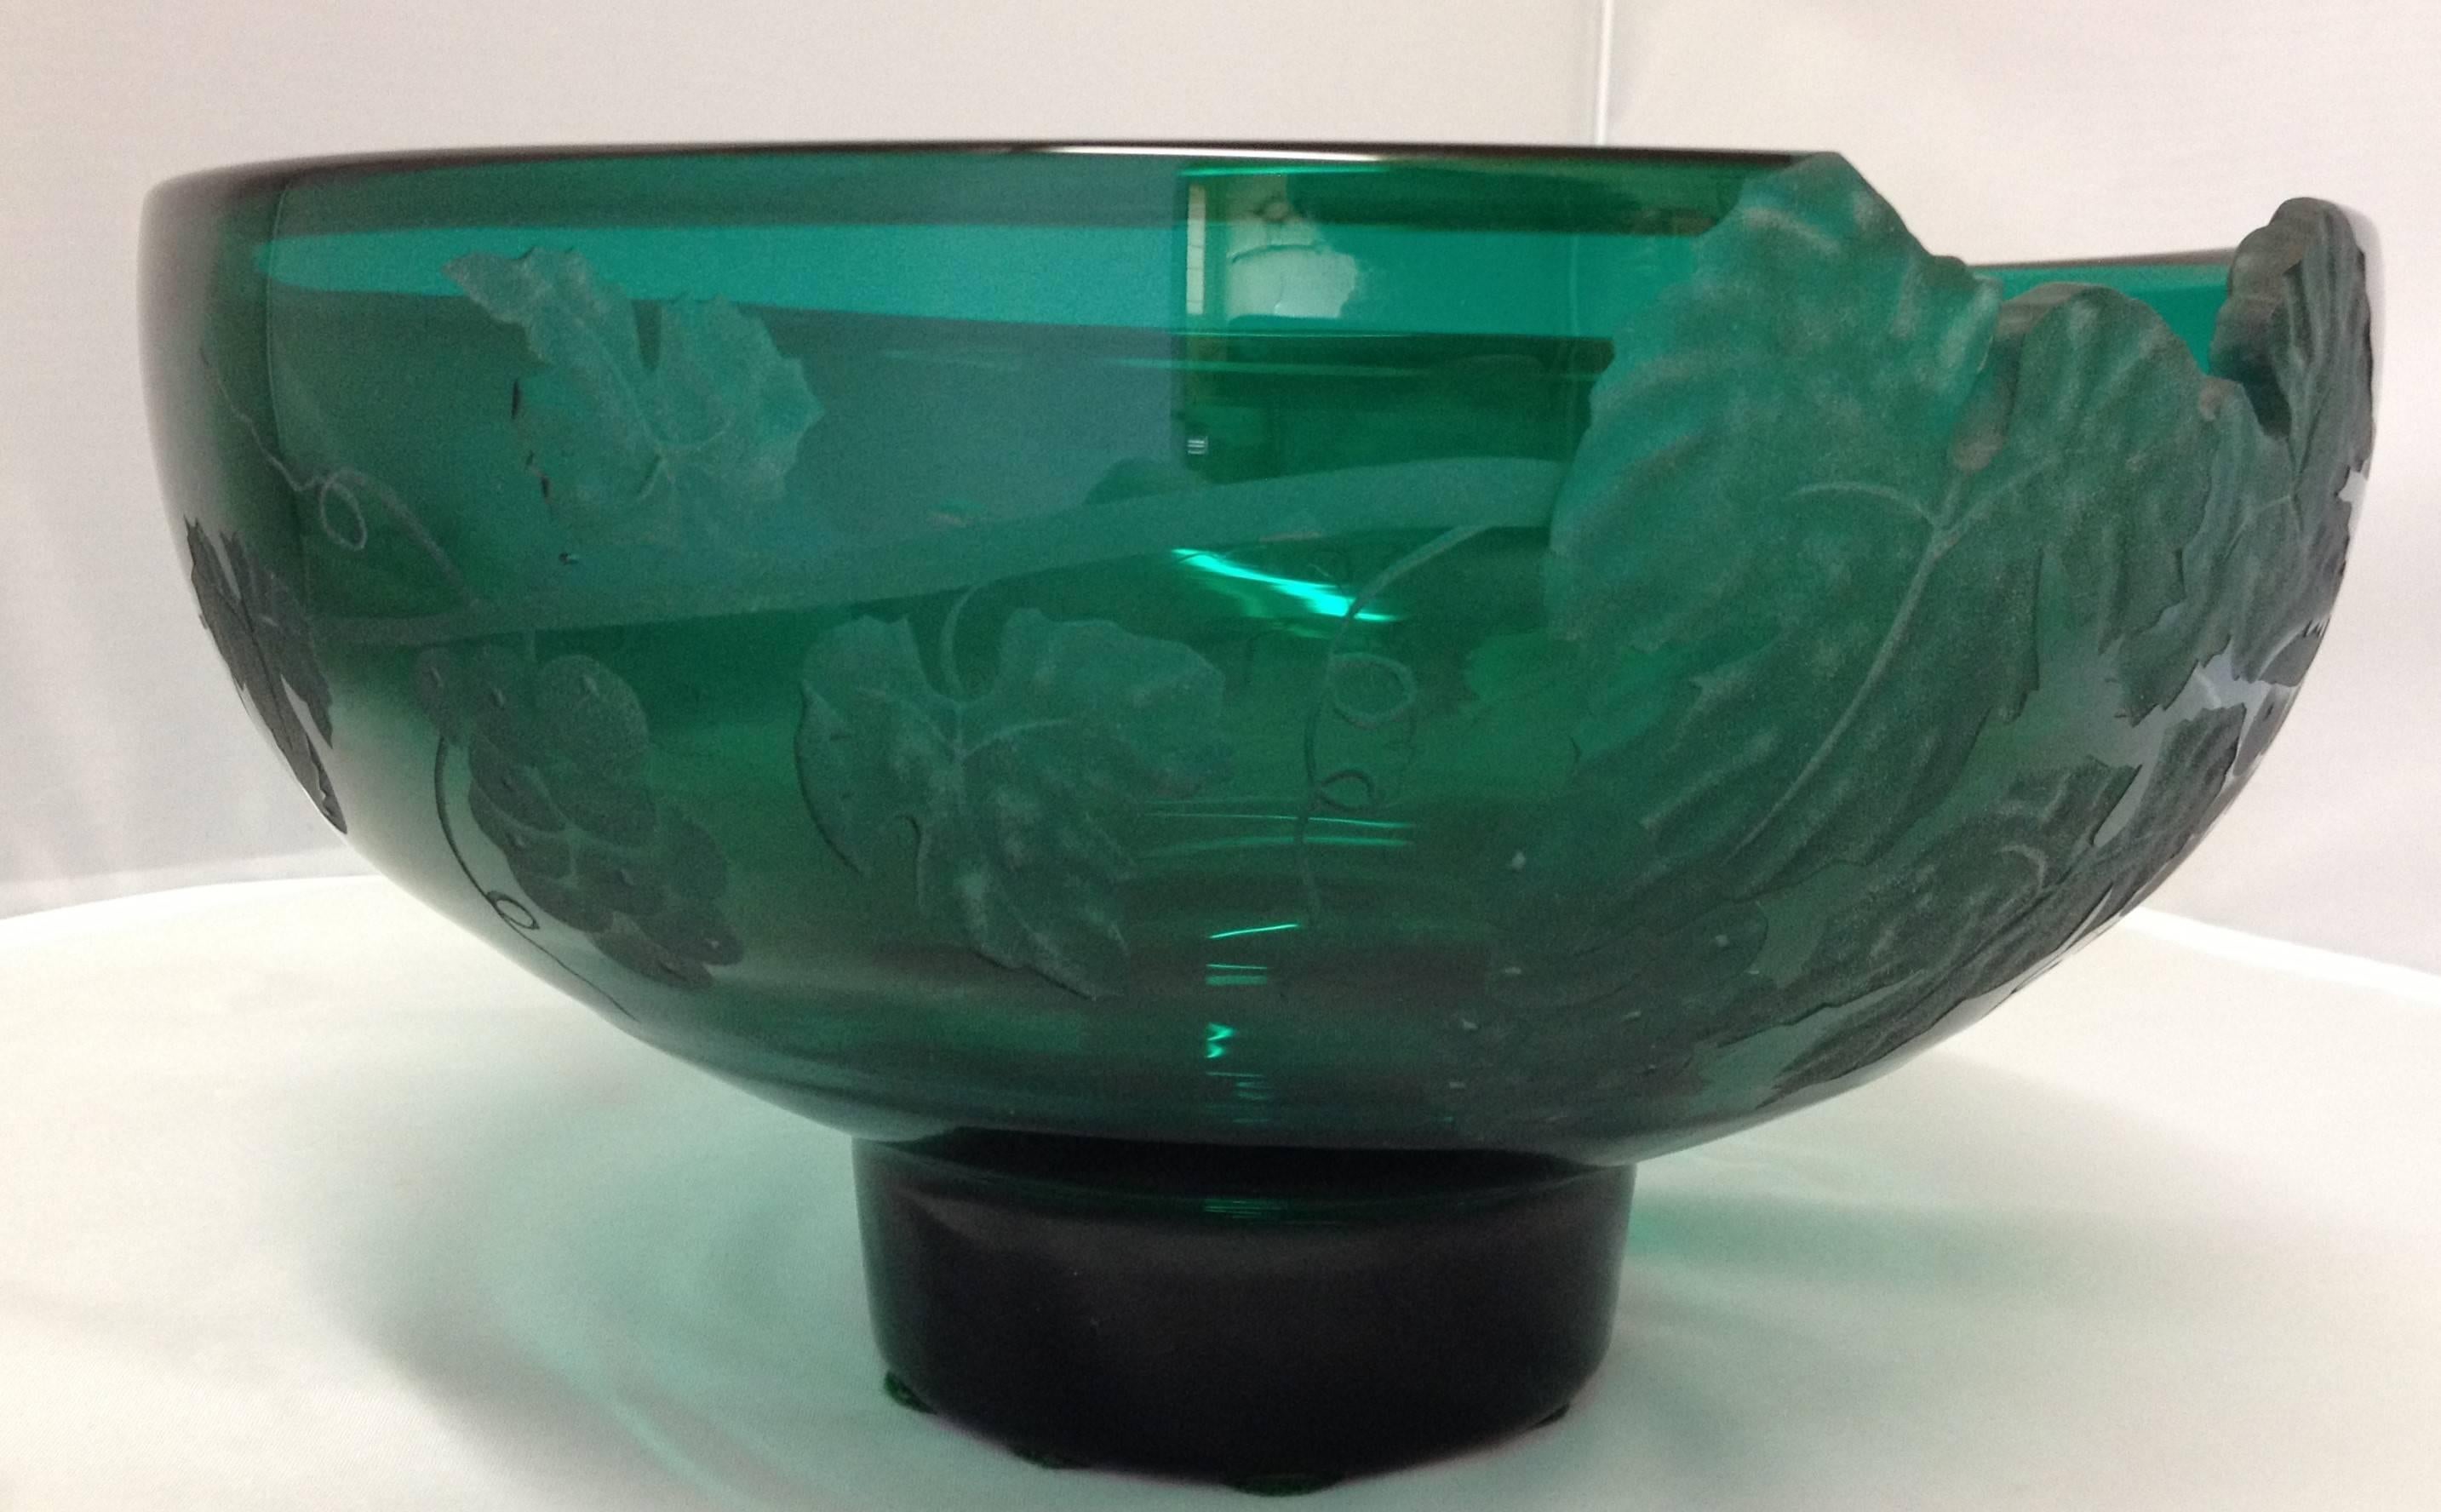 Absolutely gorgeous sand carved art glass bowl by California artist Cynthia Myers. The bowl is an emerald green handblown piece which is individually drawn, sandblasted and signed and dated. The grapes on the vine motif are hand etched with